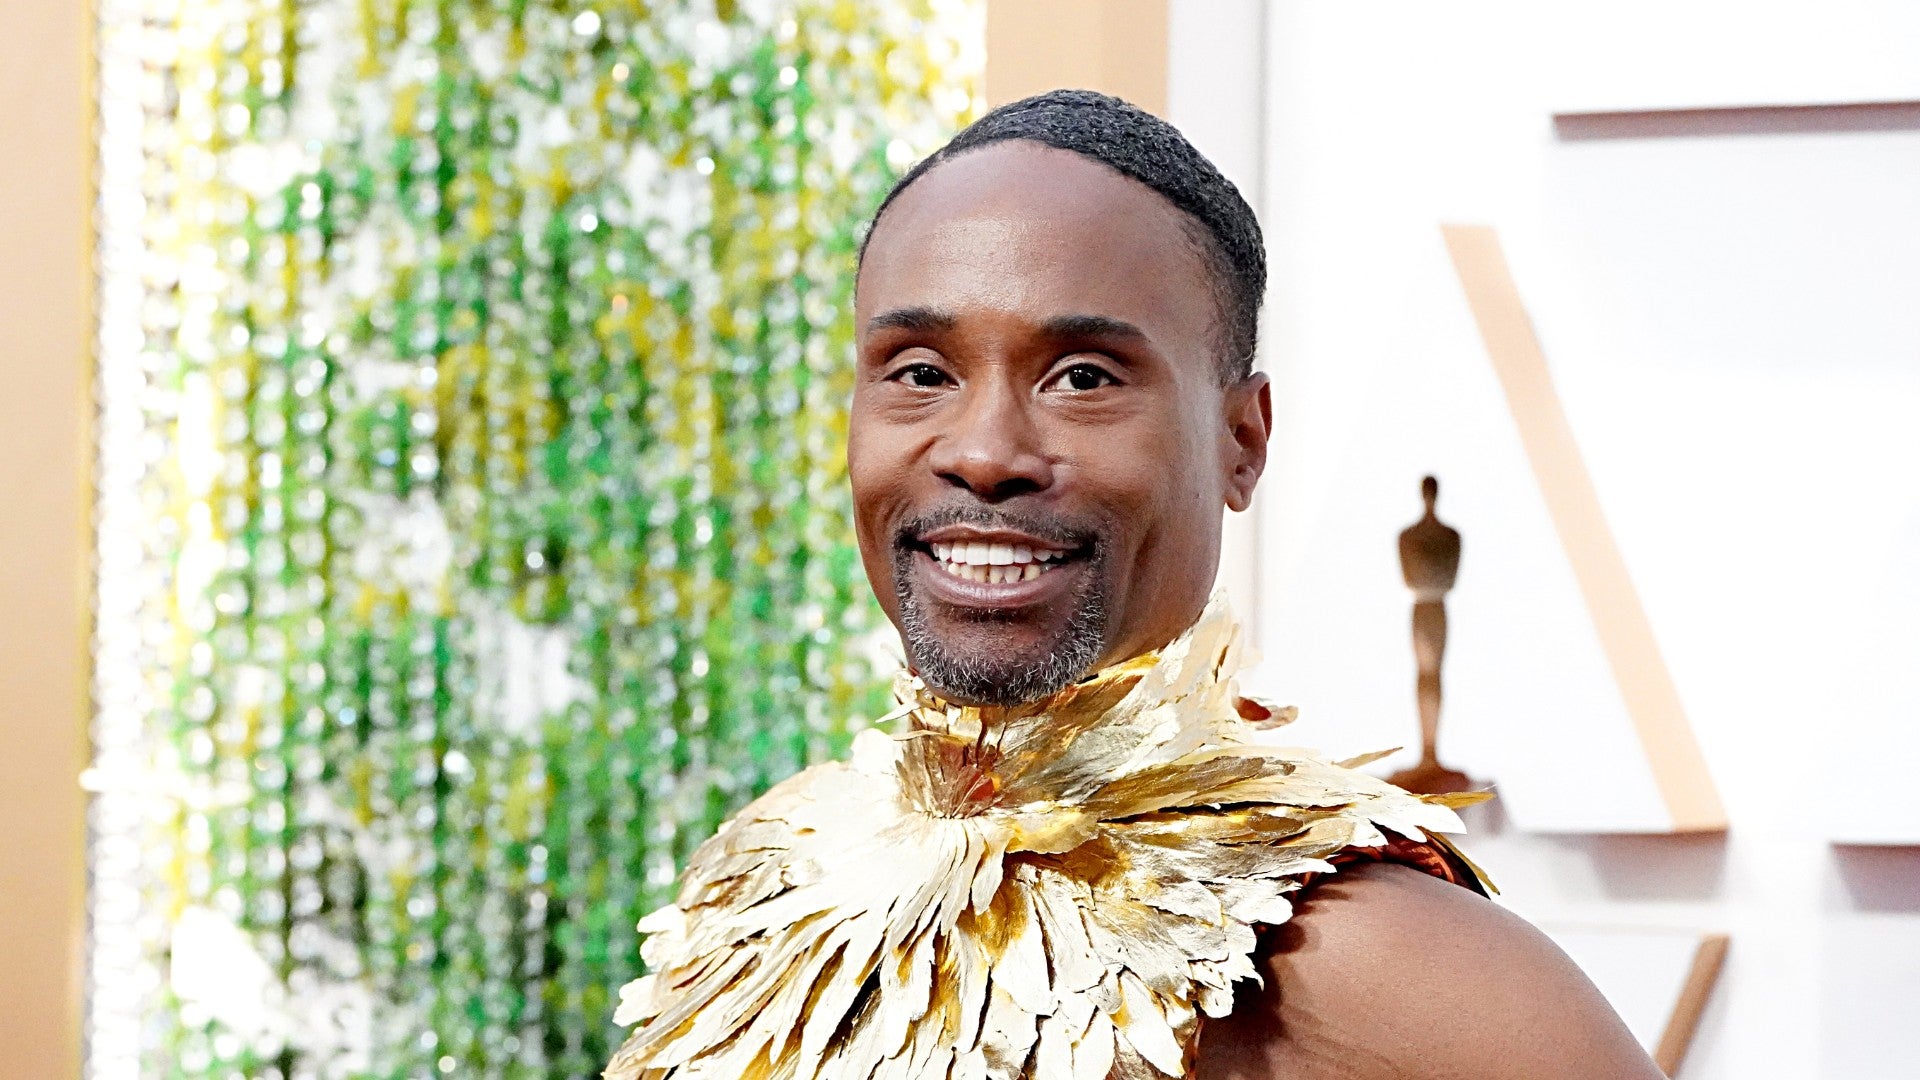 Billy Porter Got Ready For The Oscars With These Drugstore Beauty Products